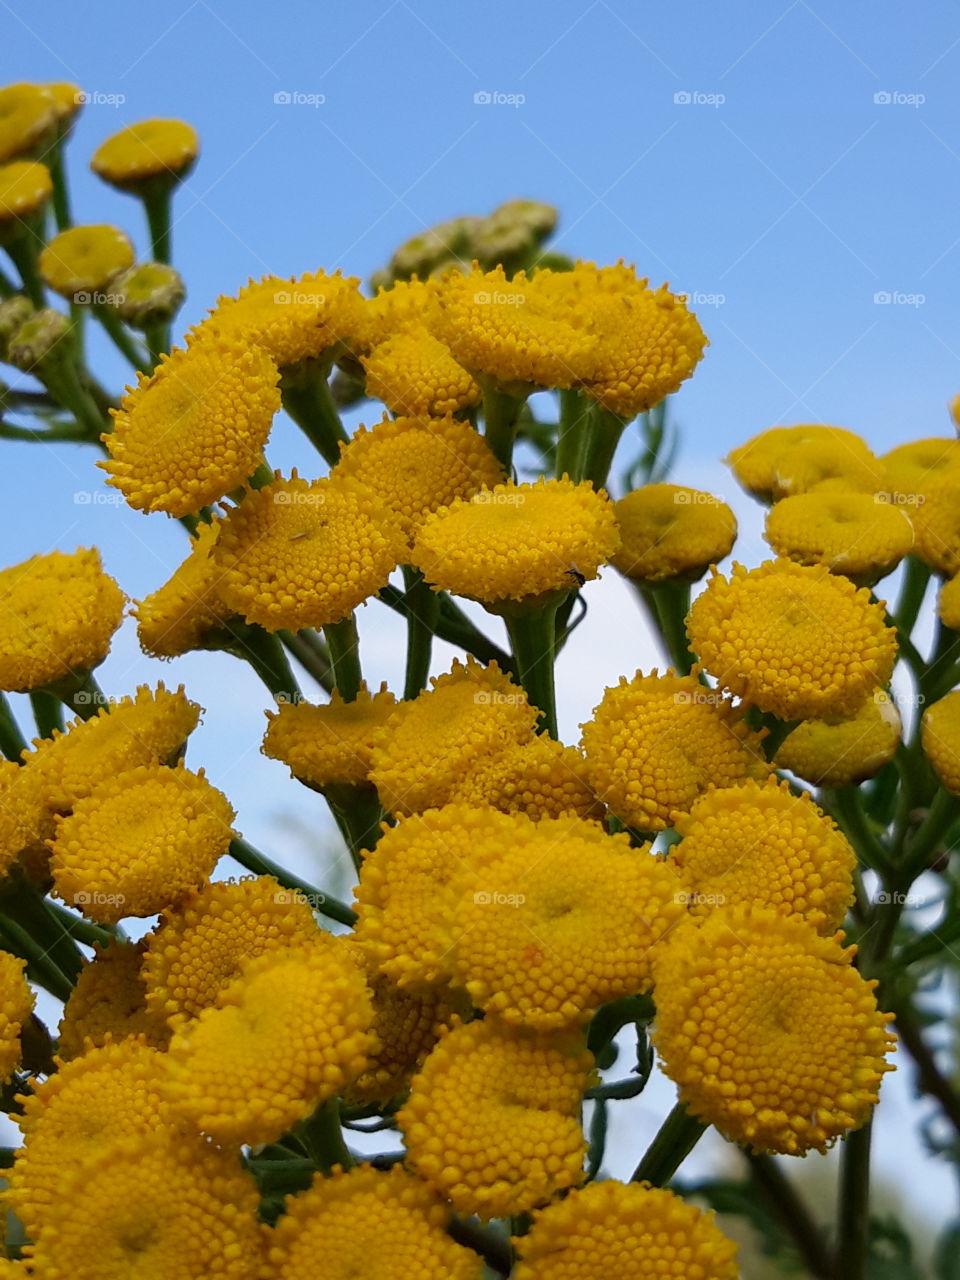 Yellow flowers on blue sky.